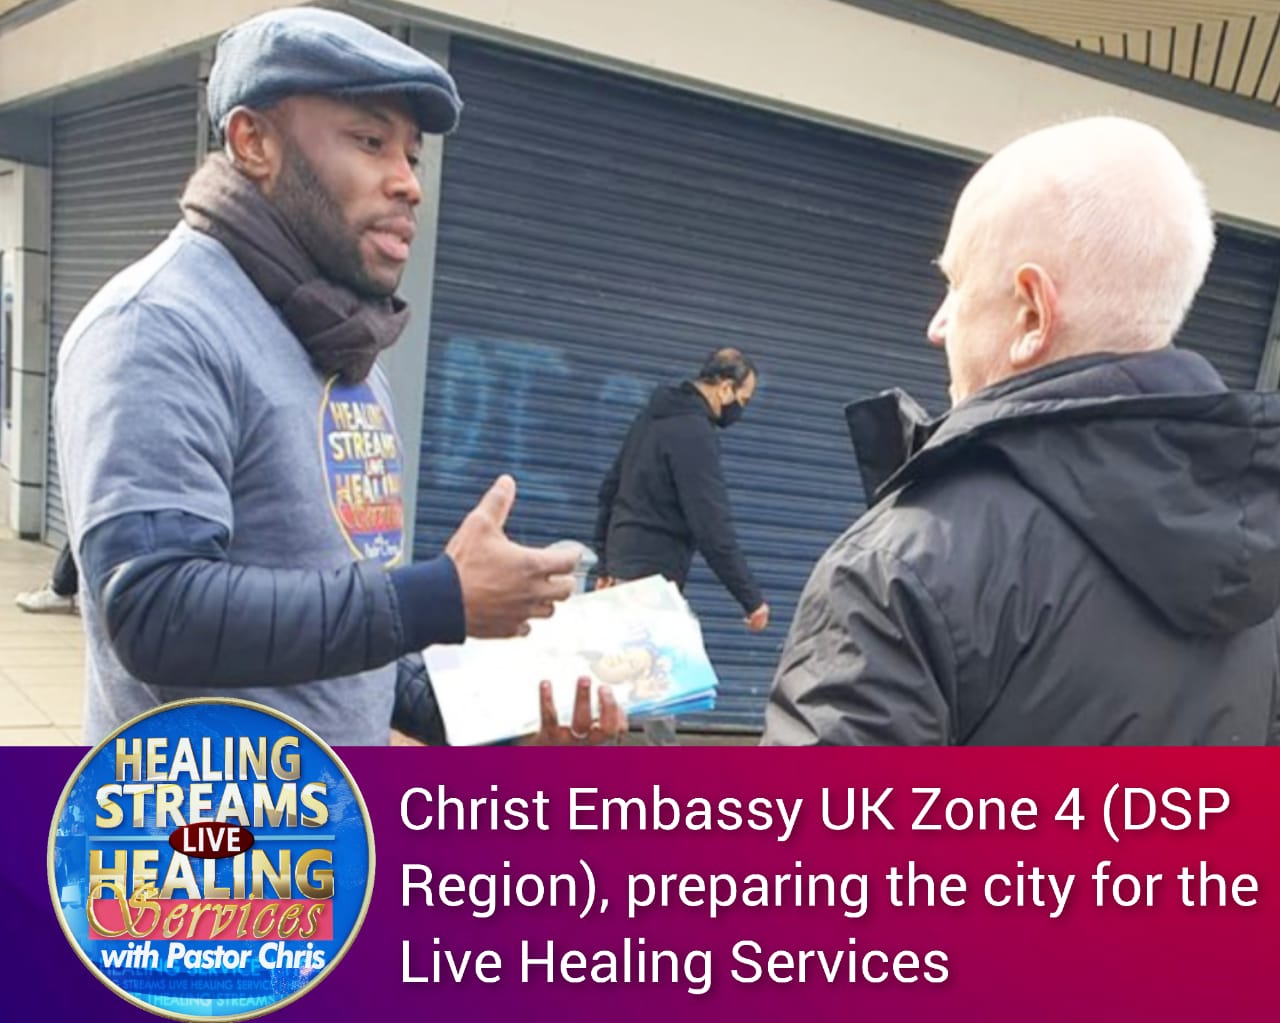 NATIONS ARE ABUZZ WITH NEWS OF THE HEALING STREAMS LIVE HEALING SERVICES